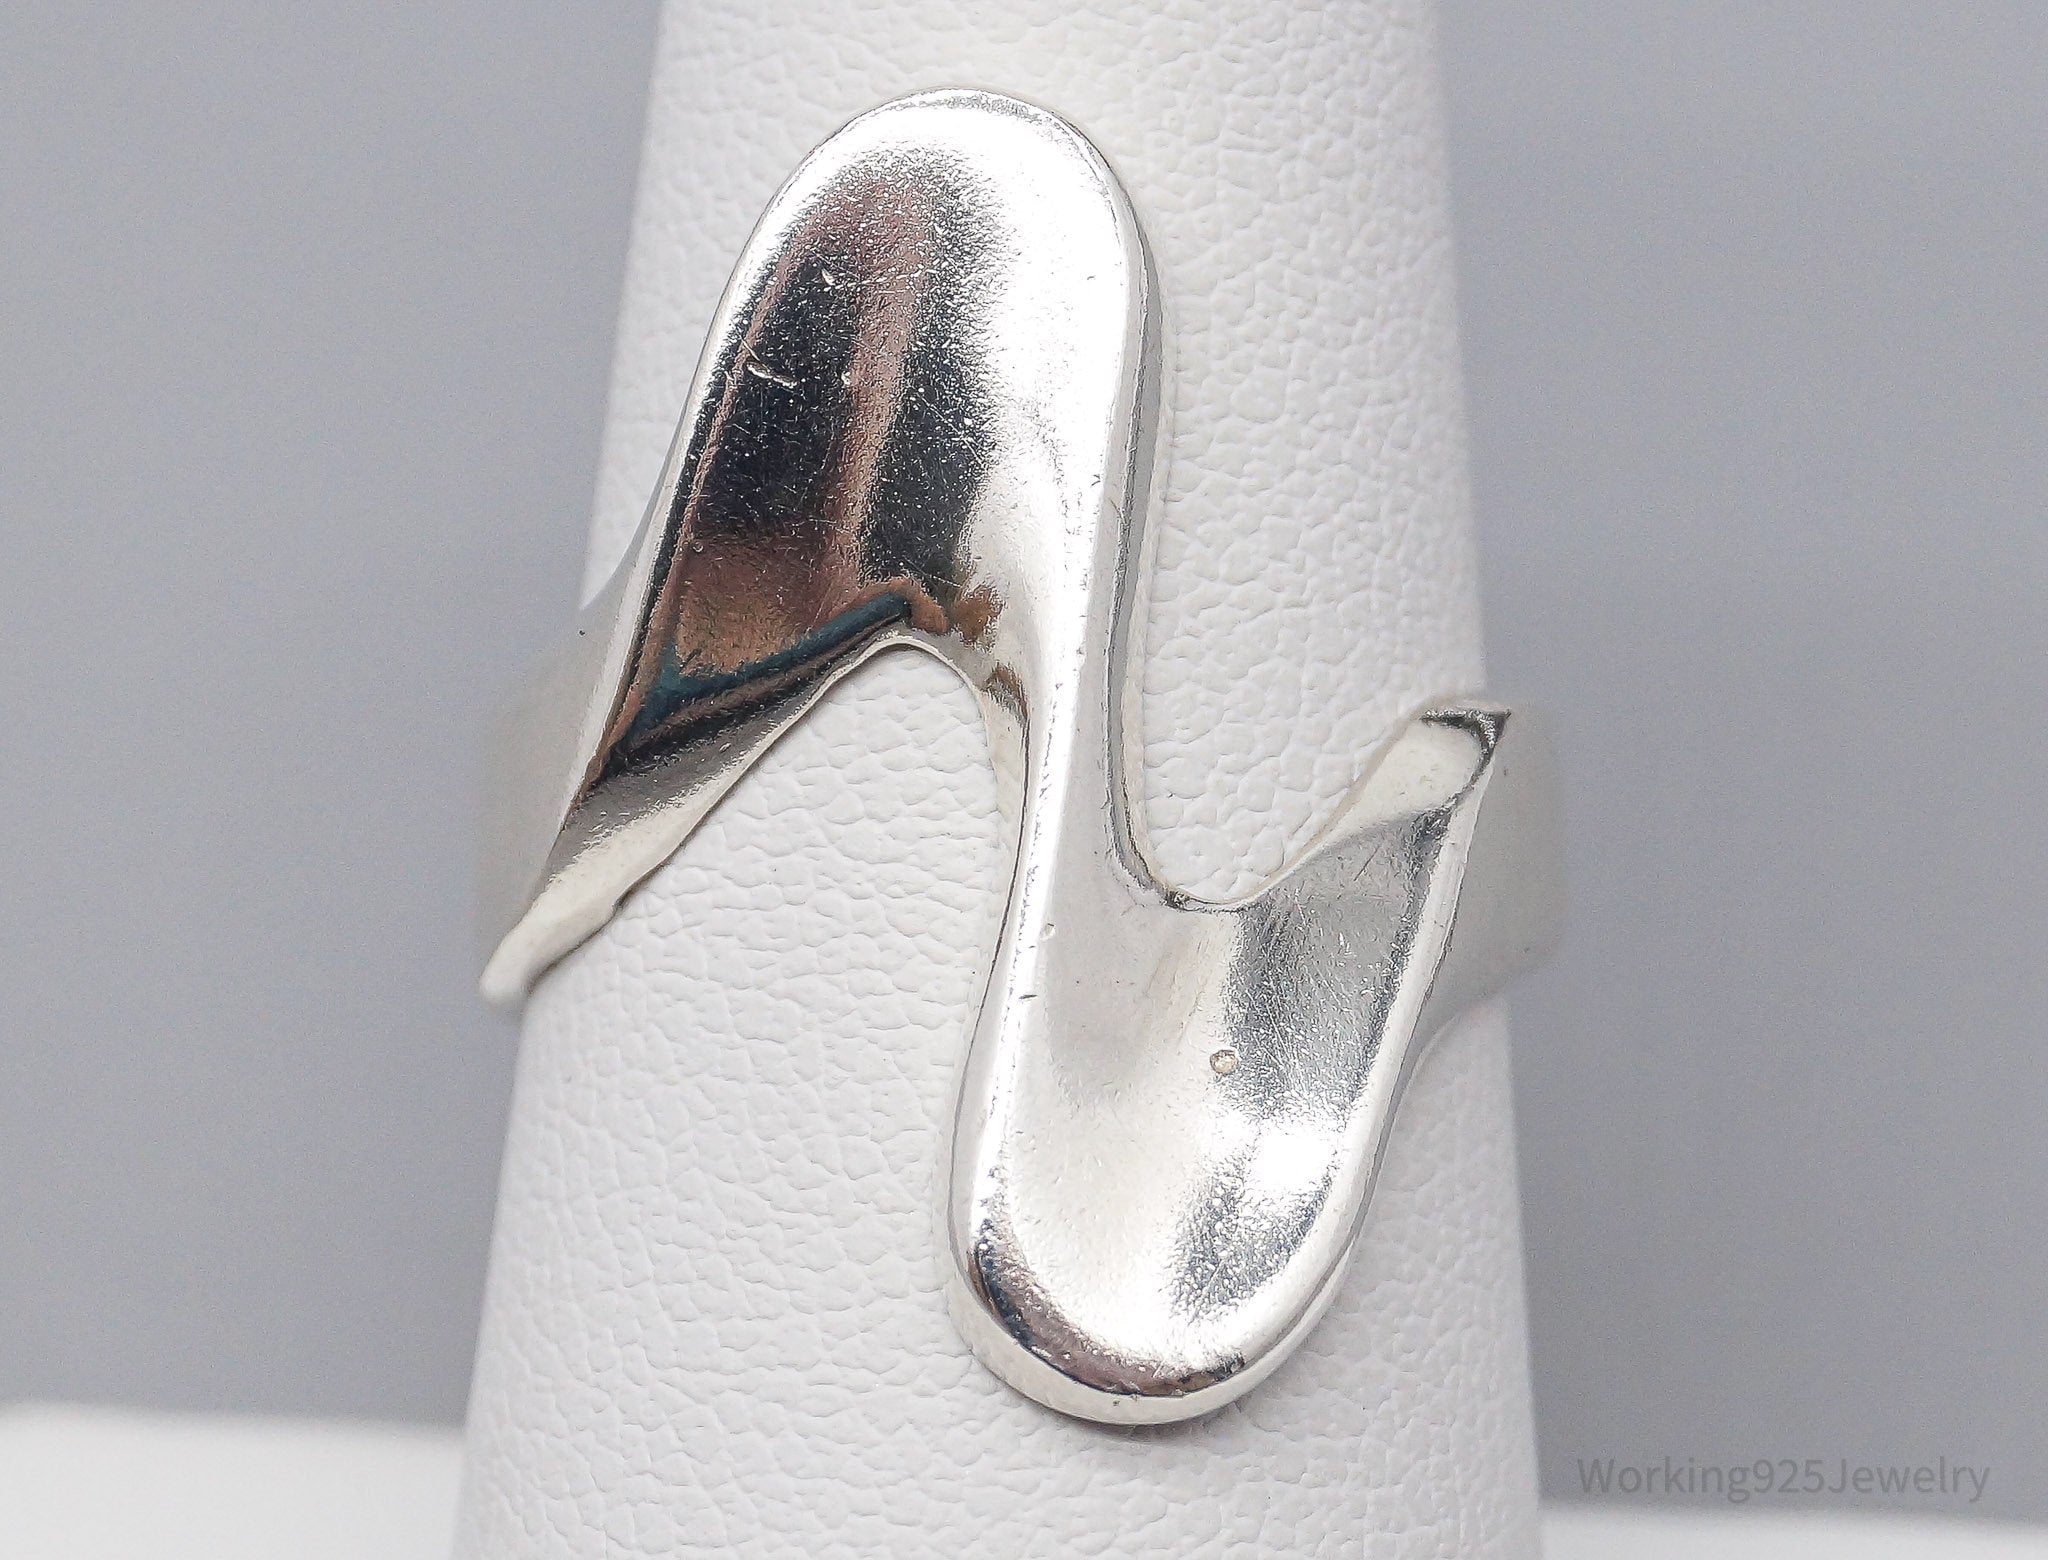 Vintage Mexican Modernist Style Wave Sterling Silver Ring - Size 7.25